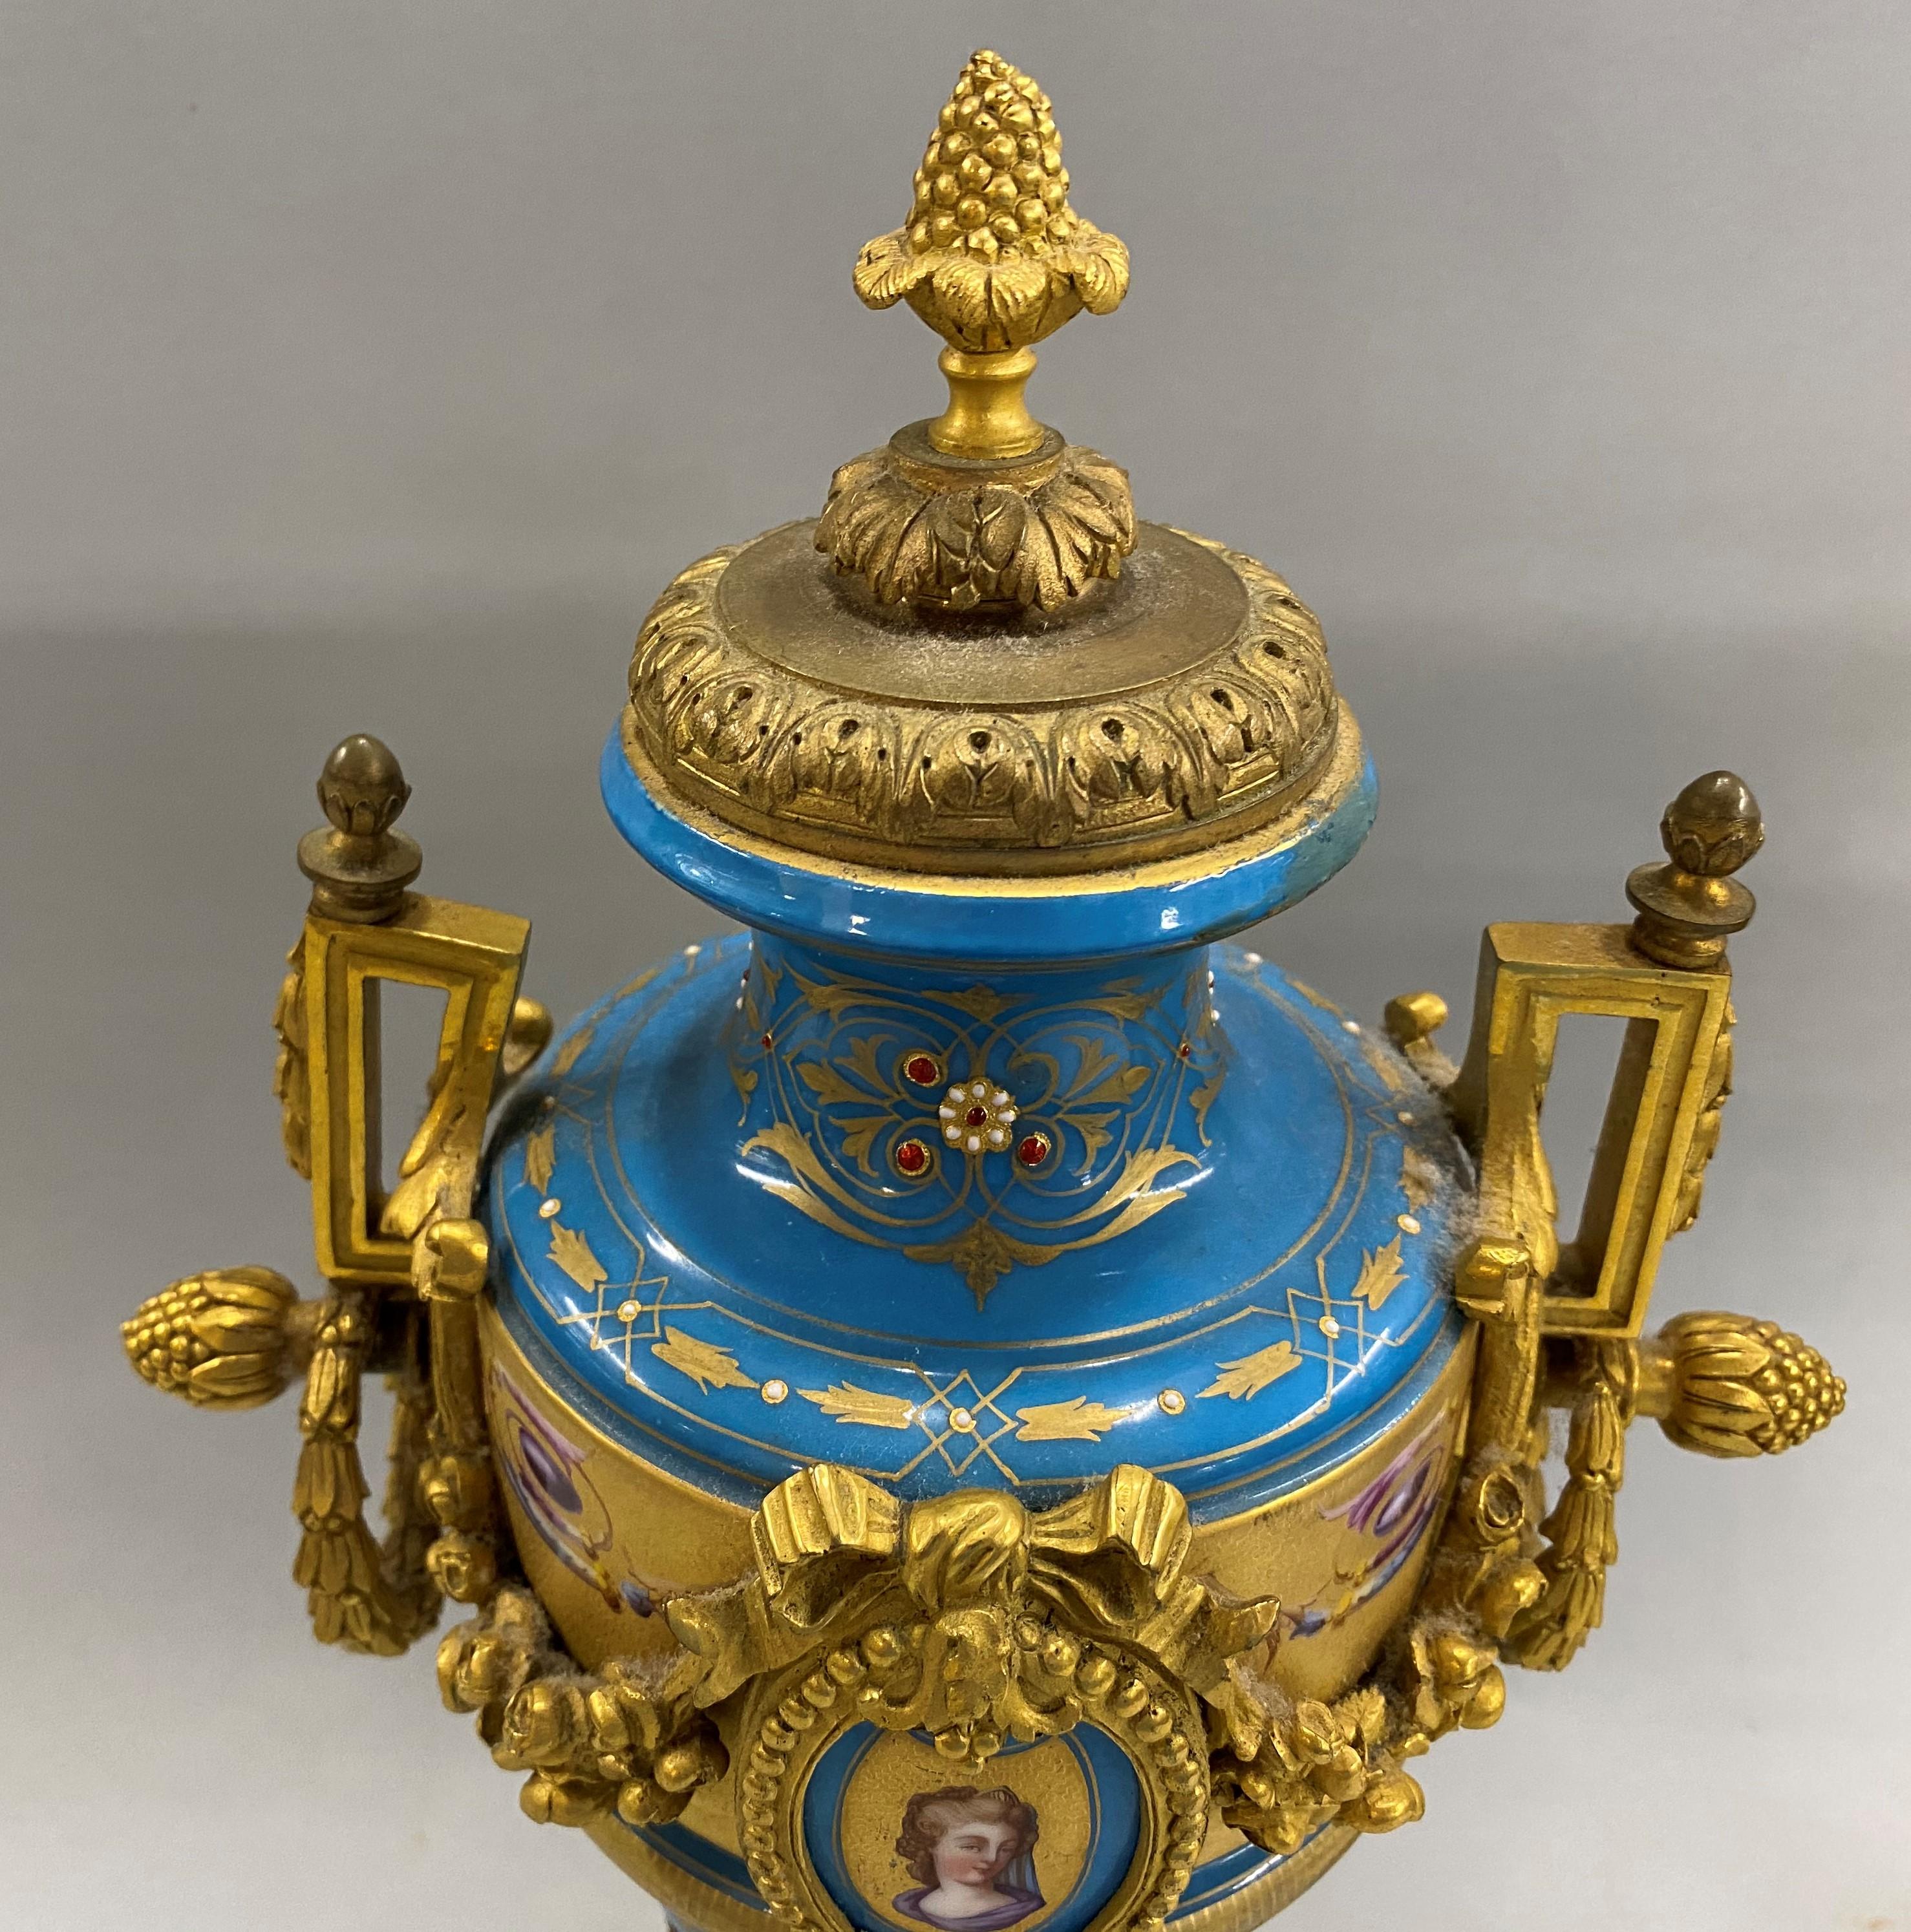 A fine pair of French Sevres Celeste Bleu porcelain urns with a polychrome hand painted oval cartouche on each featuring the bust of a woman, as well as hand painted scrollwork and decorative gilt bronze swag ormolu featuring bellflower wreaths and